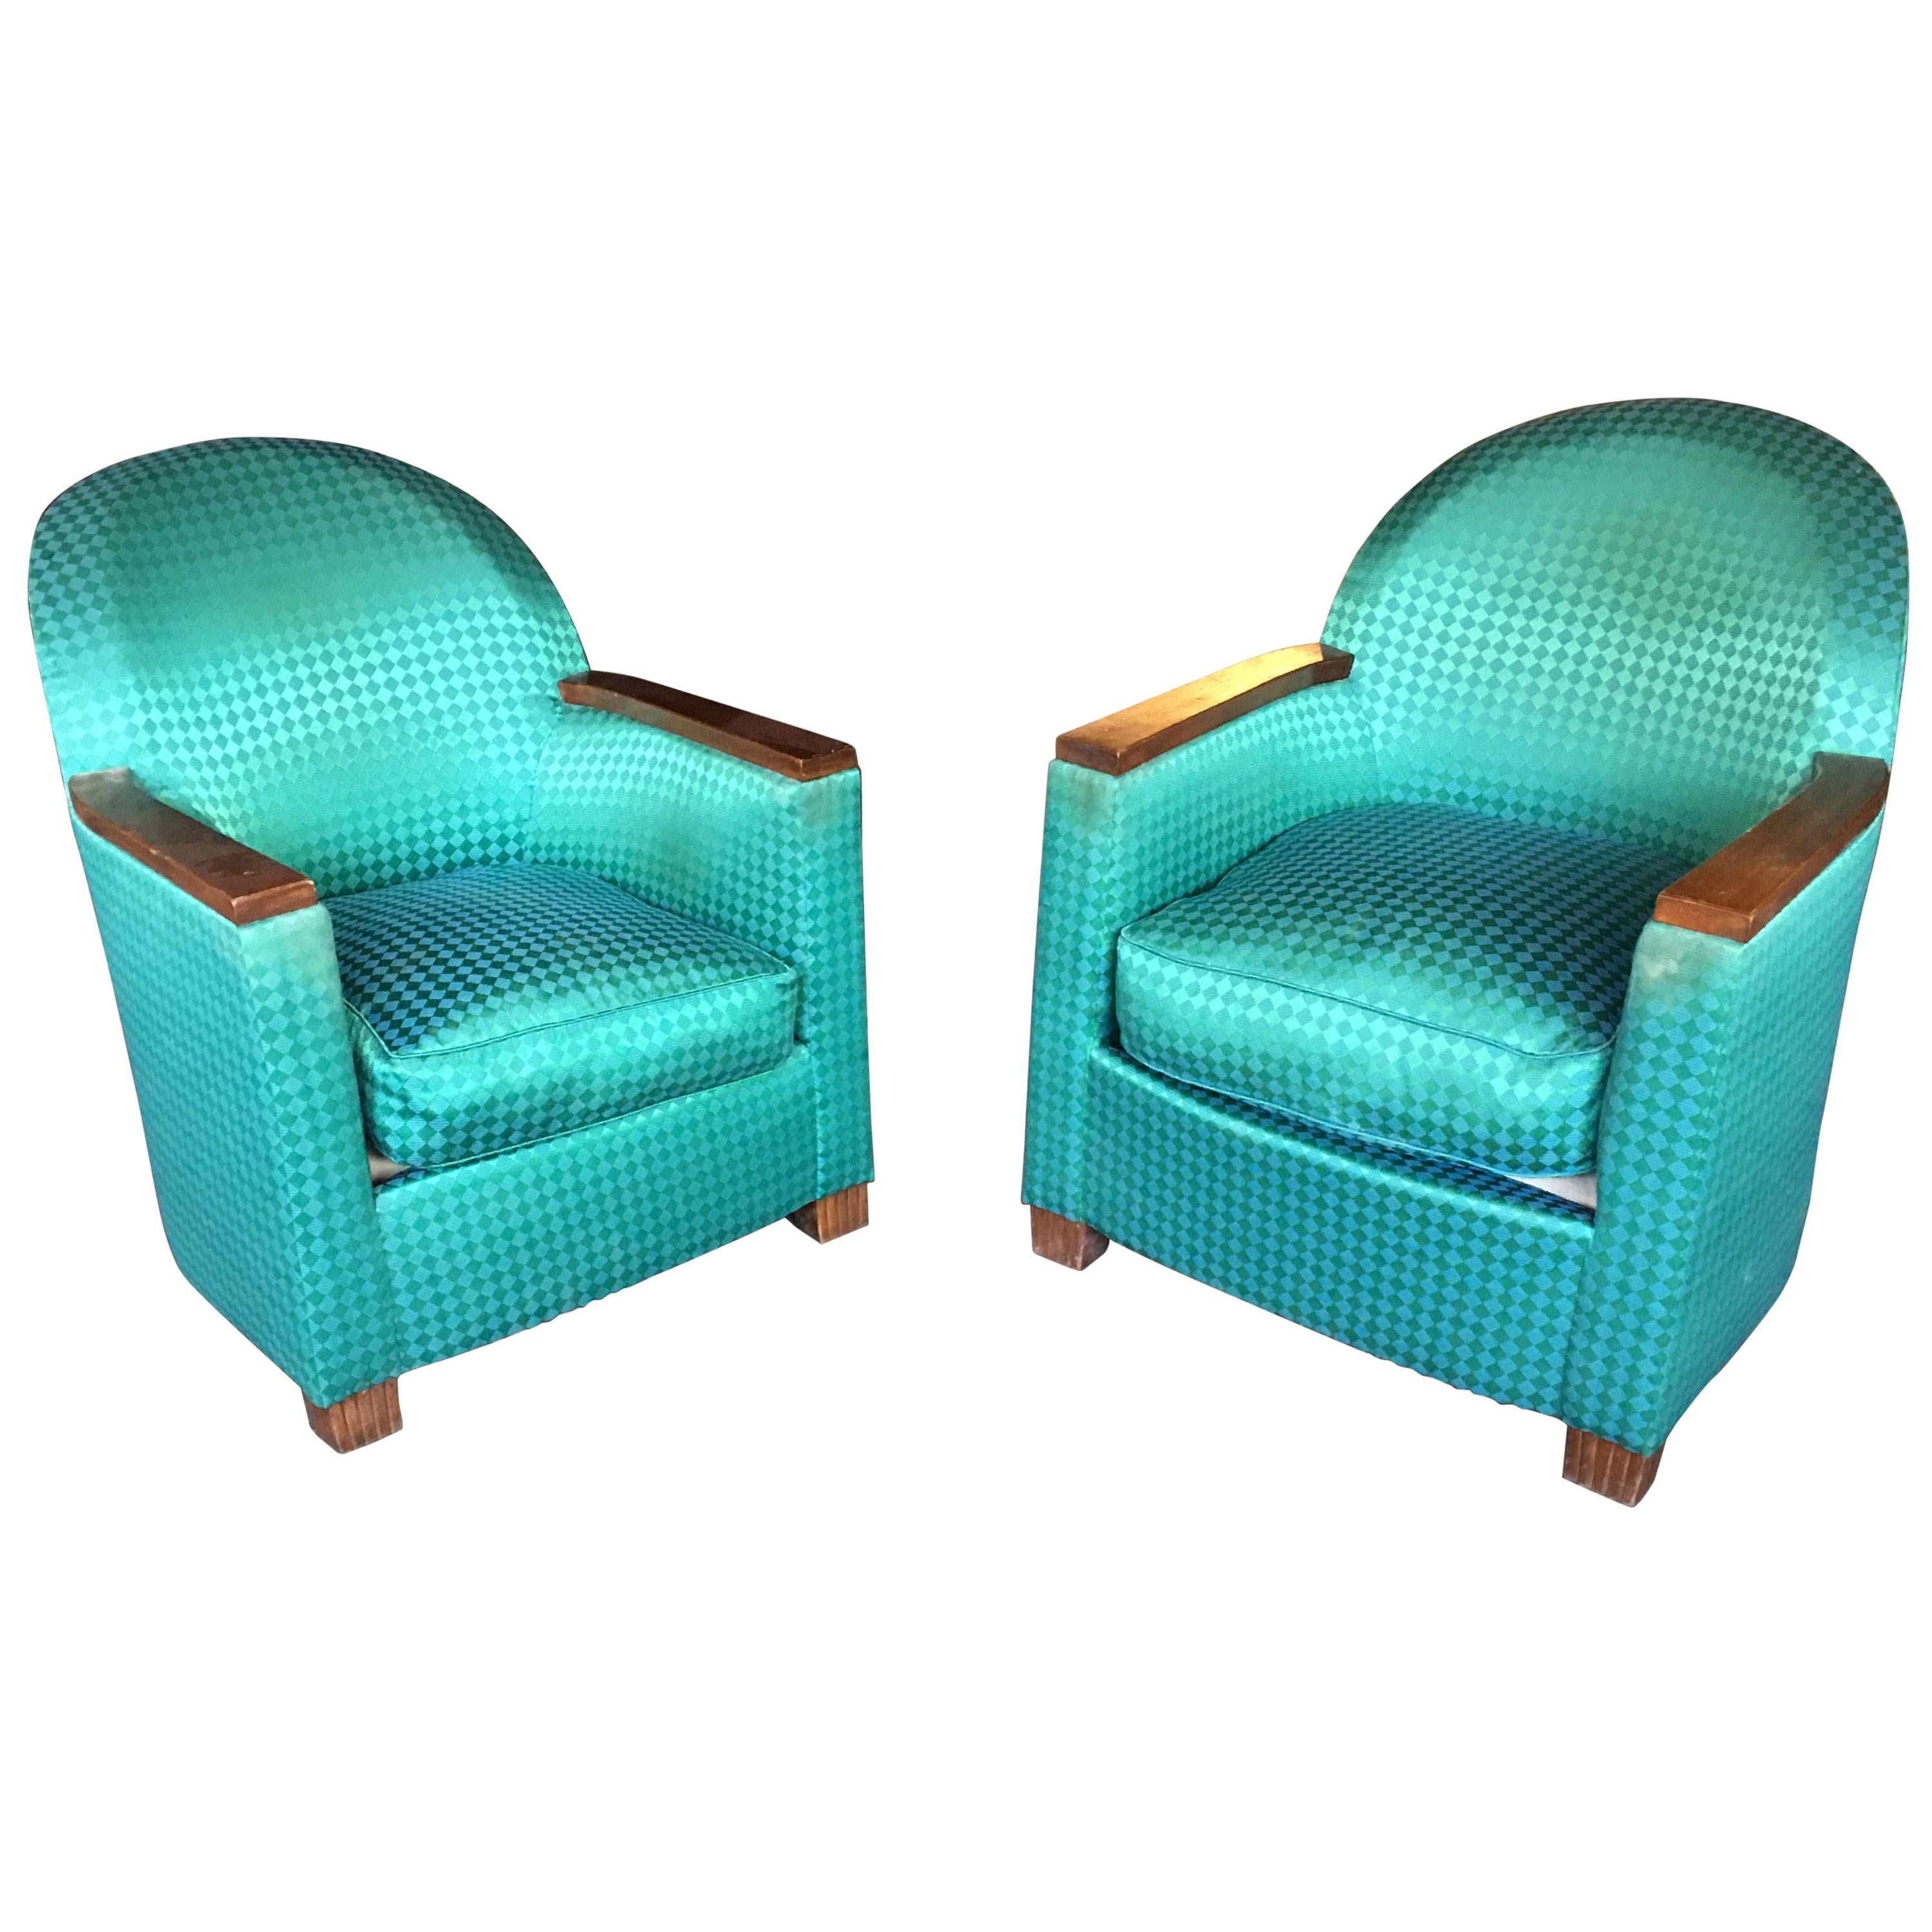 Pair of Art Deco Armchairs, Mahogany and Fabric, circa 1930 For Sale